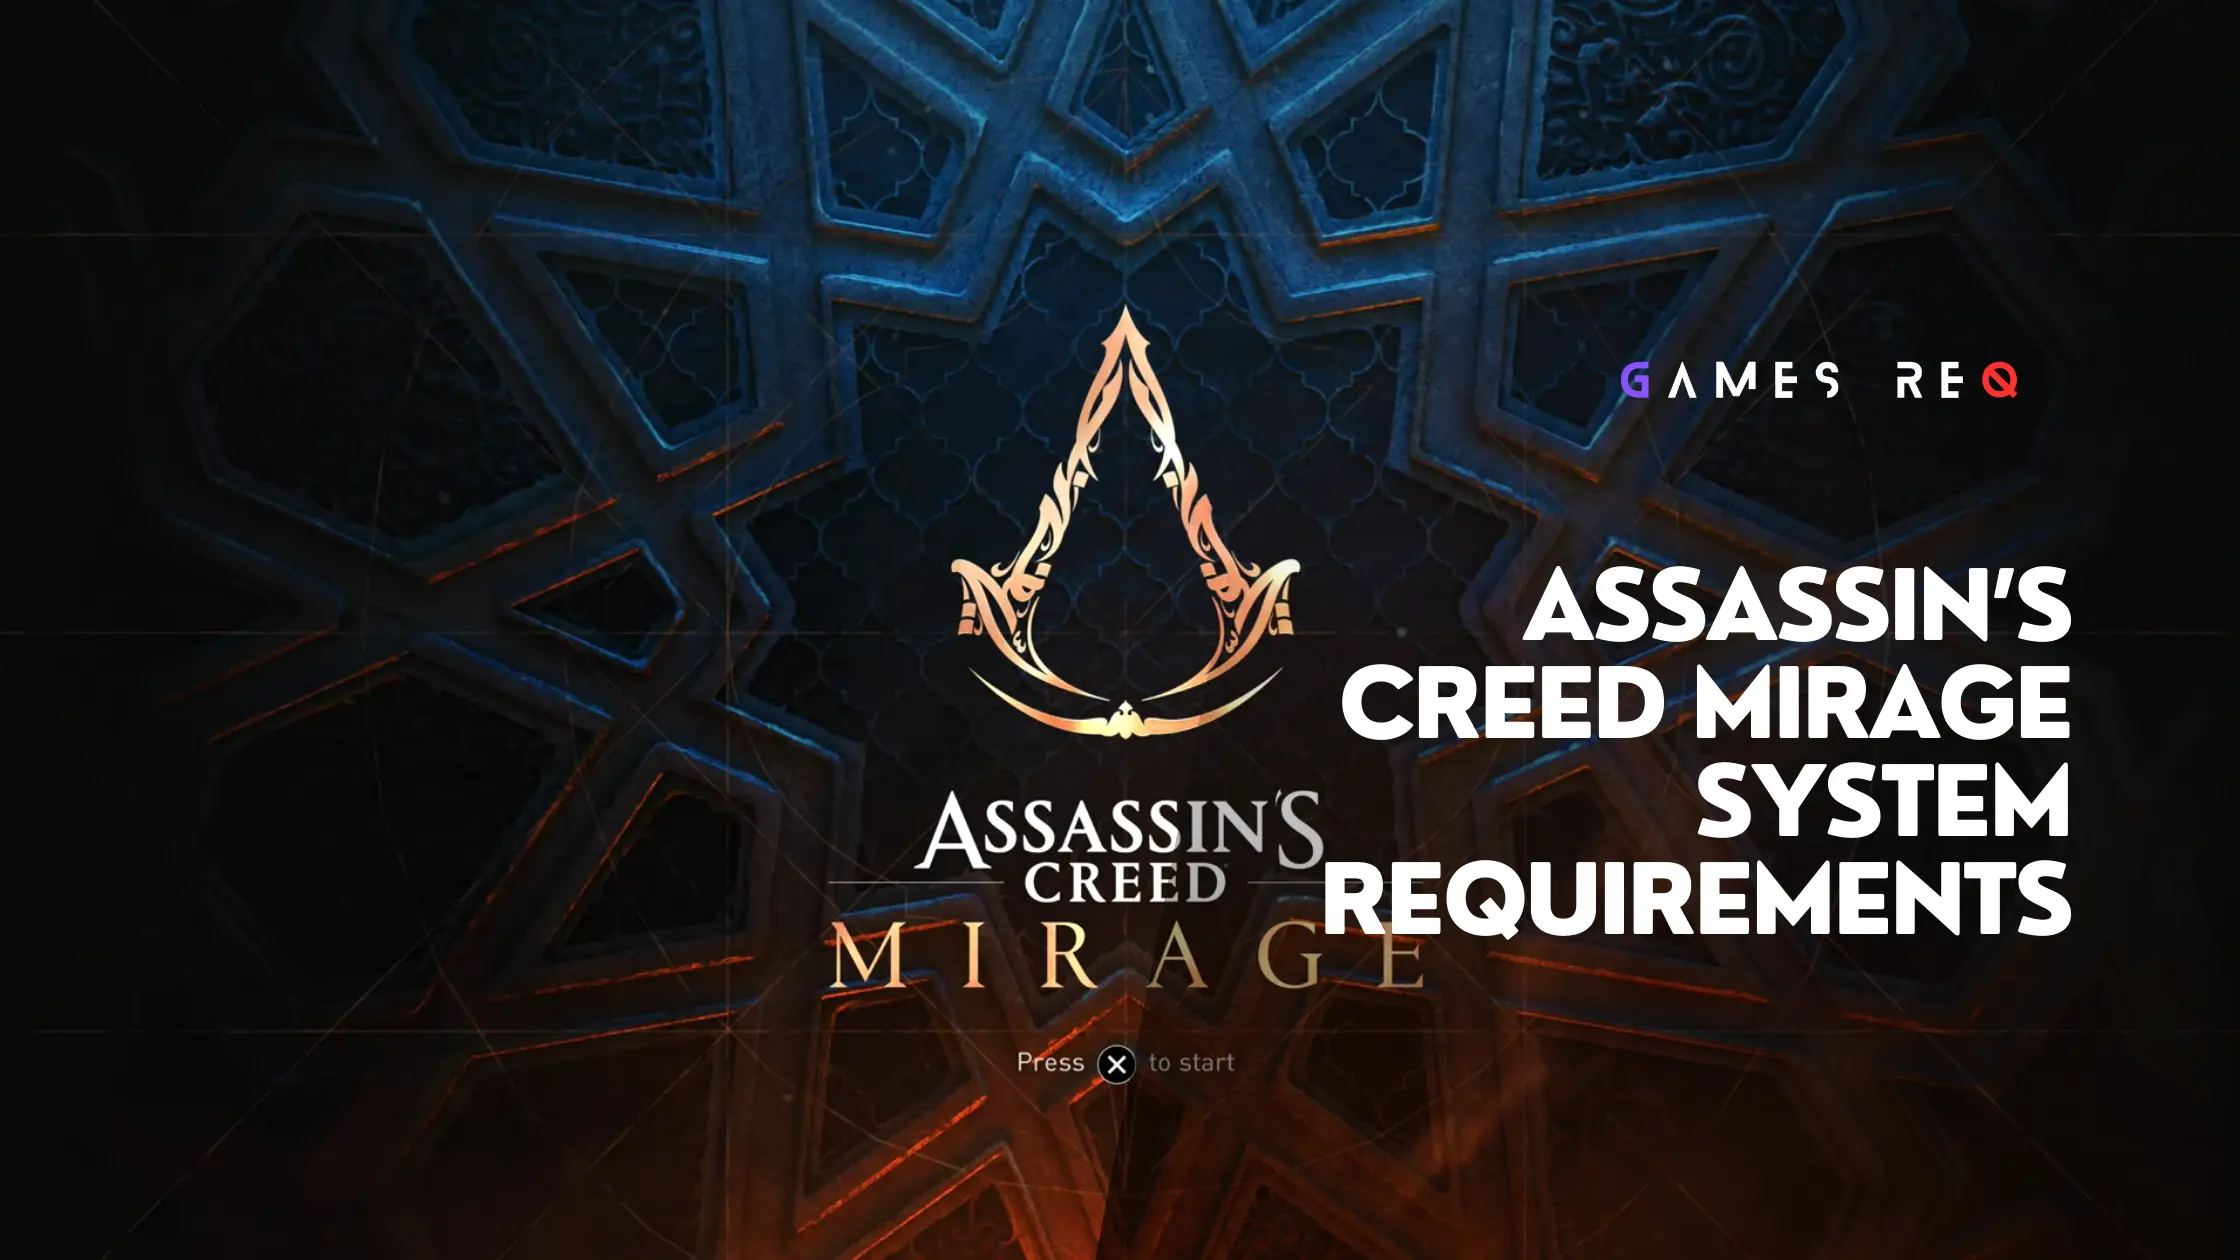 Assassins Creed Mirage System Requirements Games Req